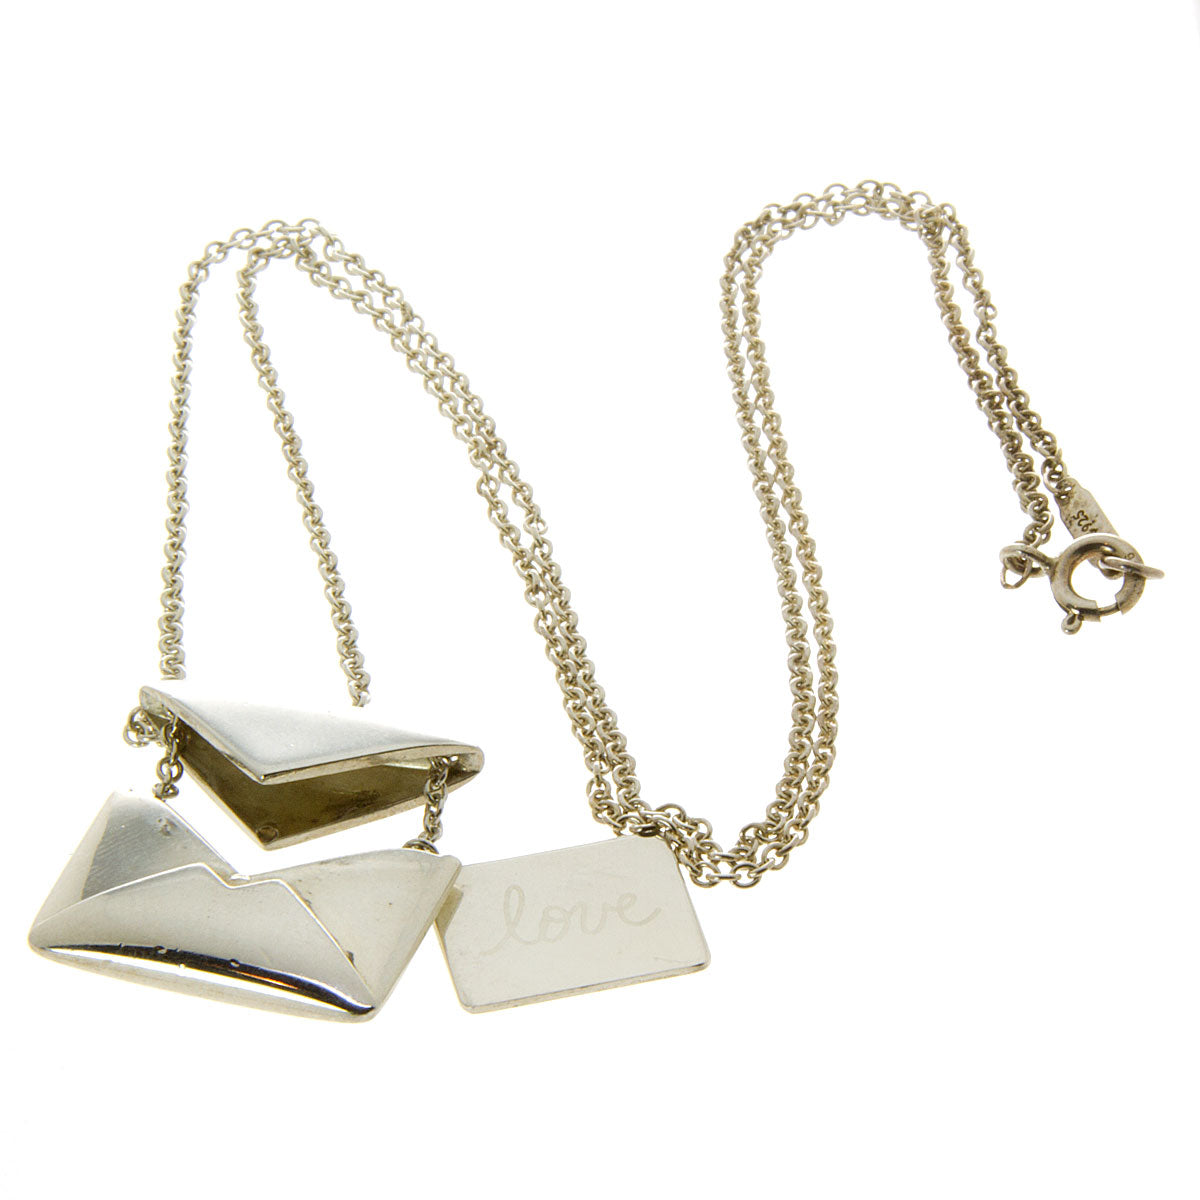 LOVE LETTER NECKLACE – Shisan